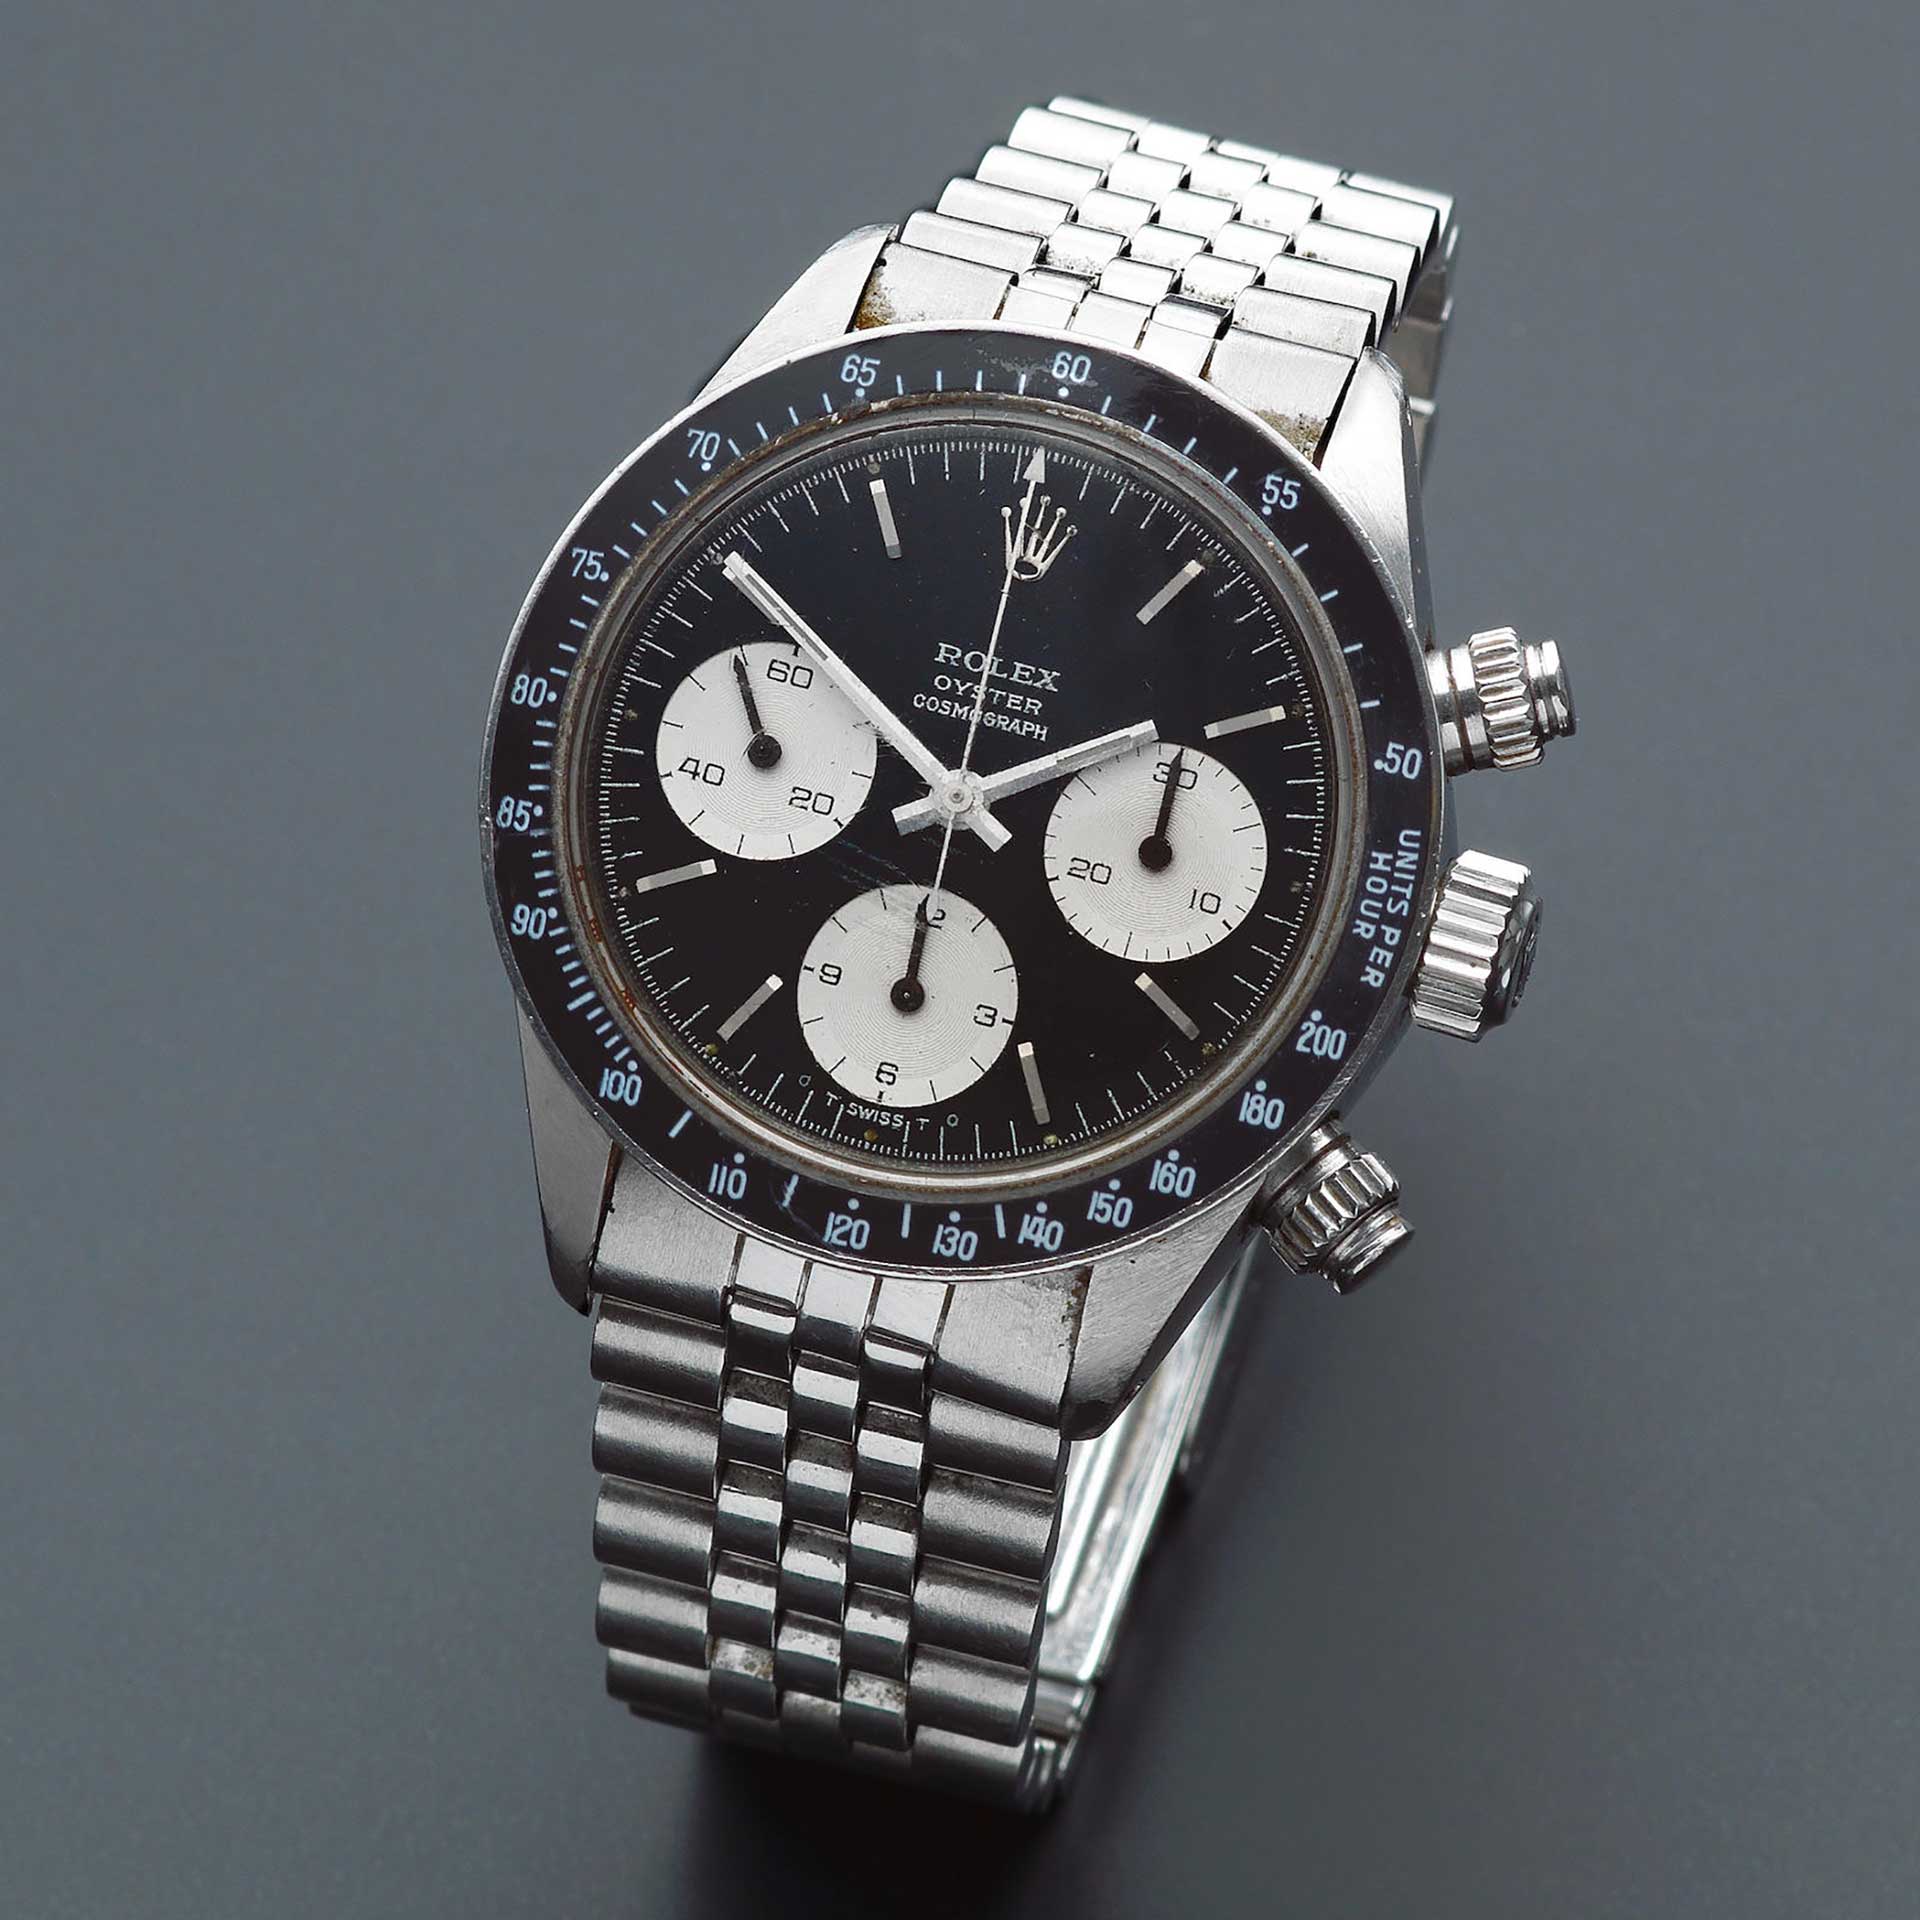 LOT 15 Rolex Stainless Steel Manual Wind Chronograph